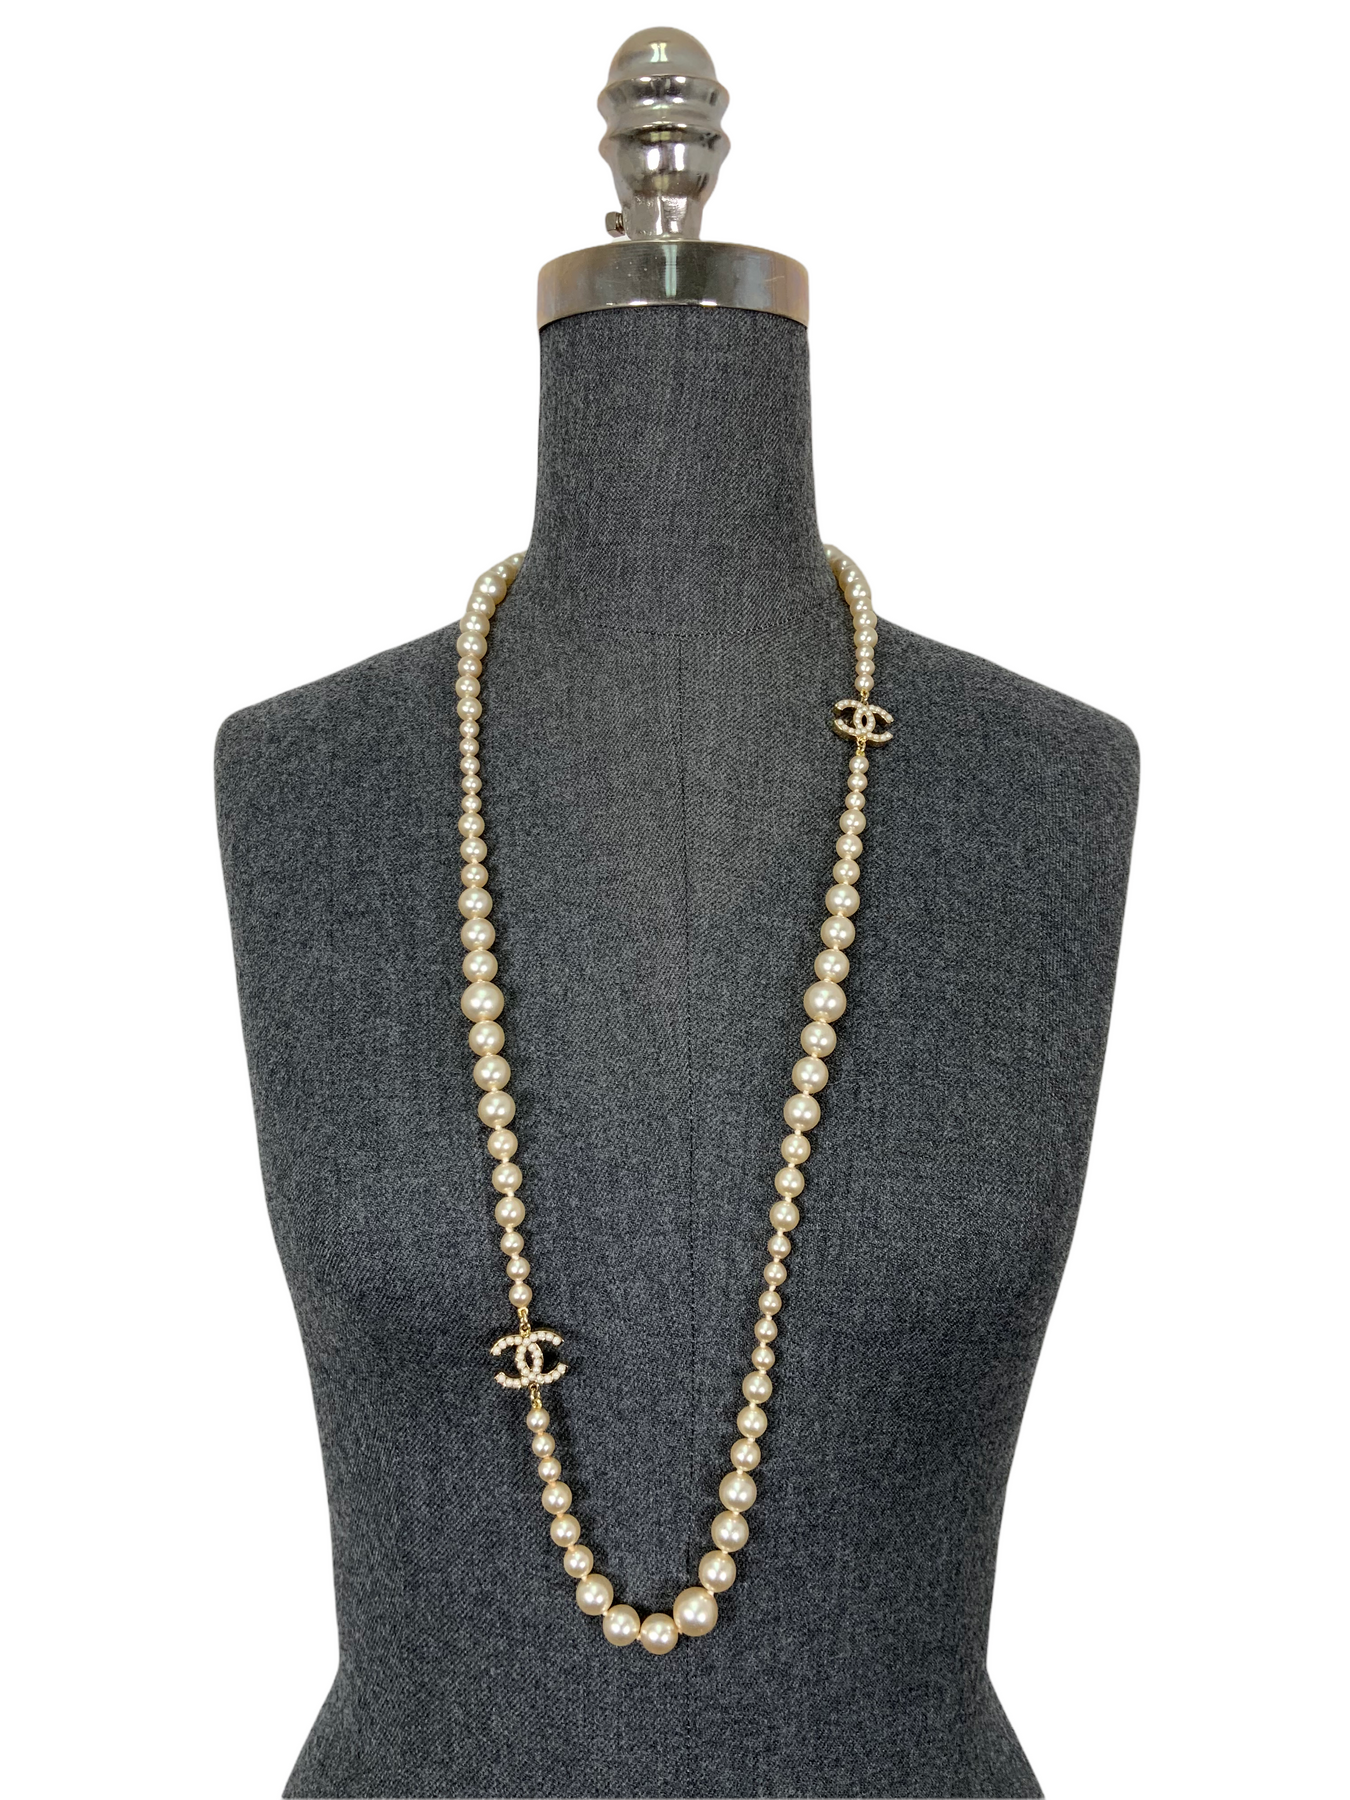 Chanel Vintage Double Chain Necklace With Round Faux Pearls